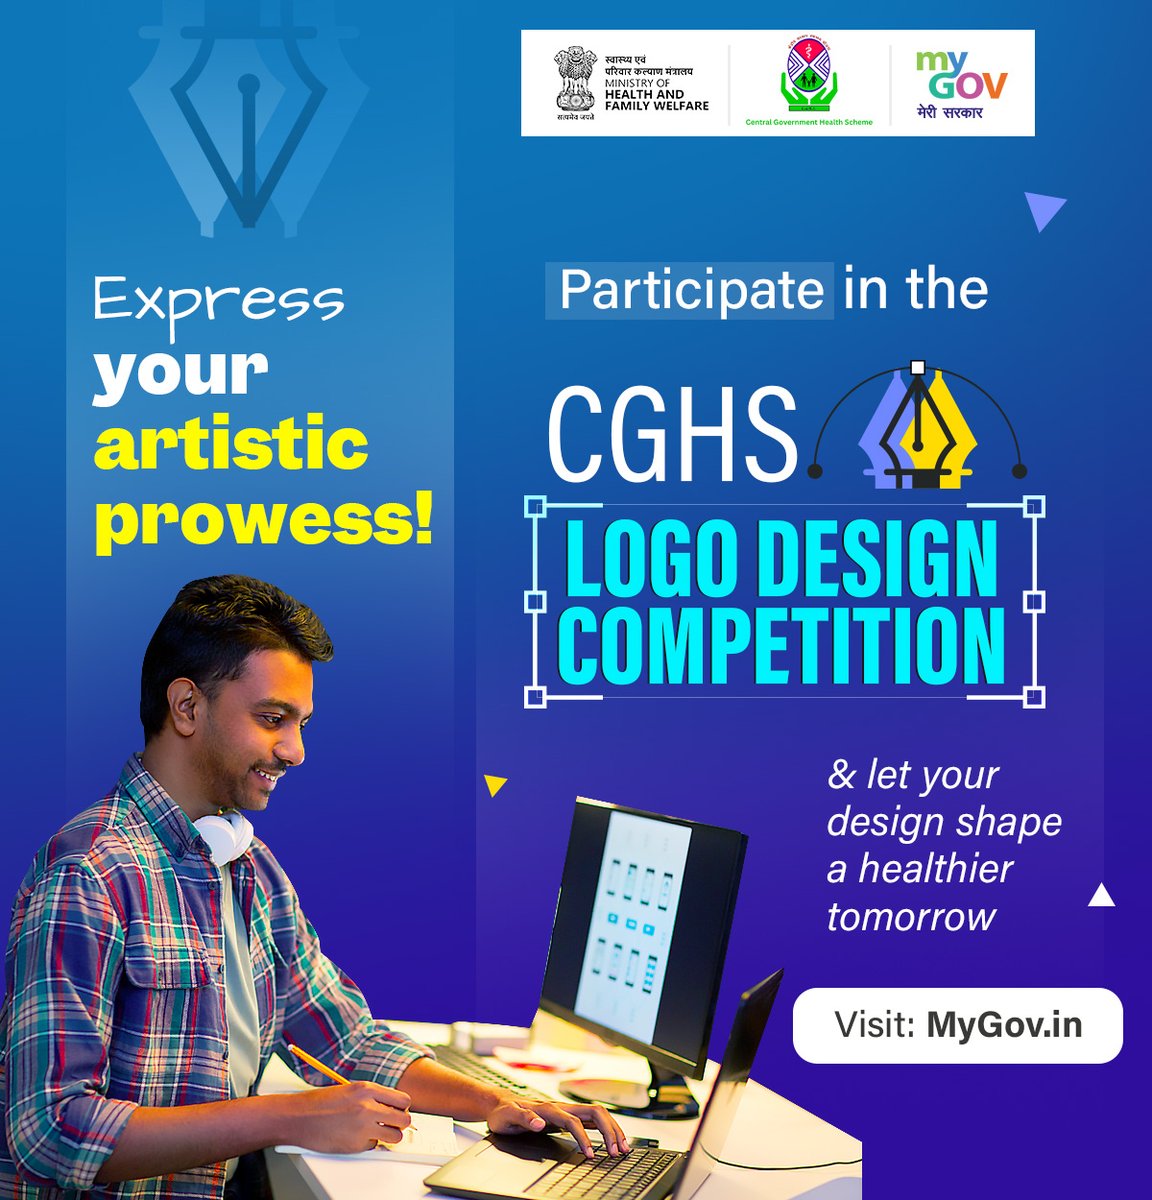 Get ready to make a difference in healthcare! 

Join the CGHS Logo Design Competition on #MyGov and help shape the future of healthcare in India

Visit: mygov.in/task/cghs-logo…

#DesignCompetition #Healthcare
@MoHFW_INDIA